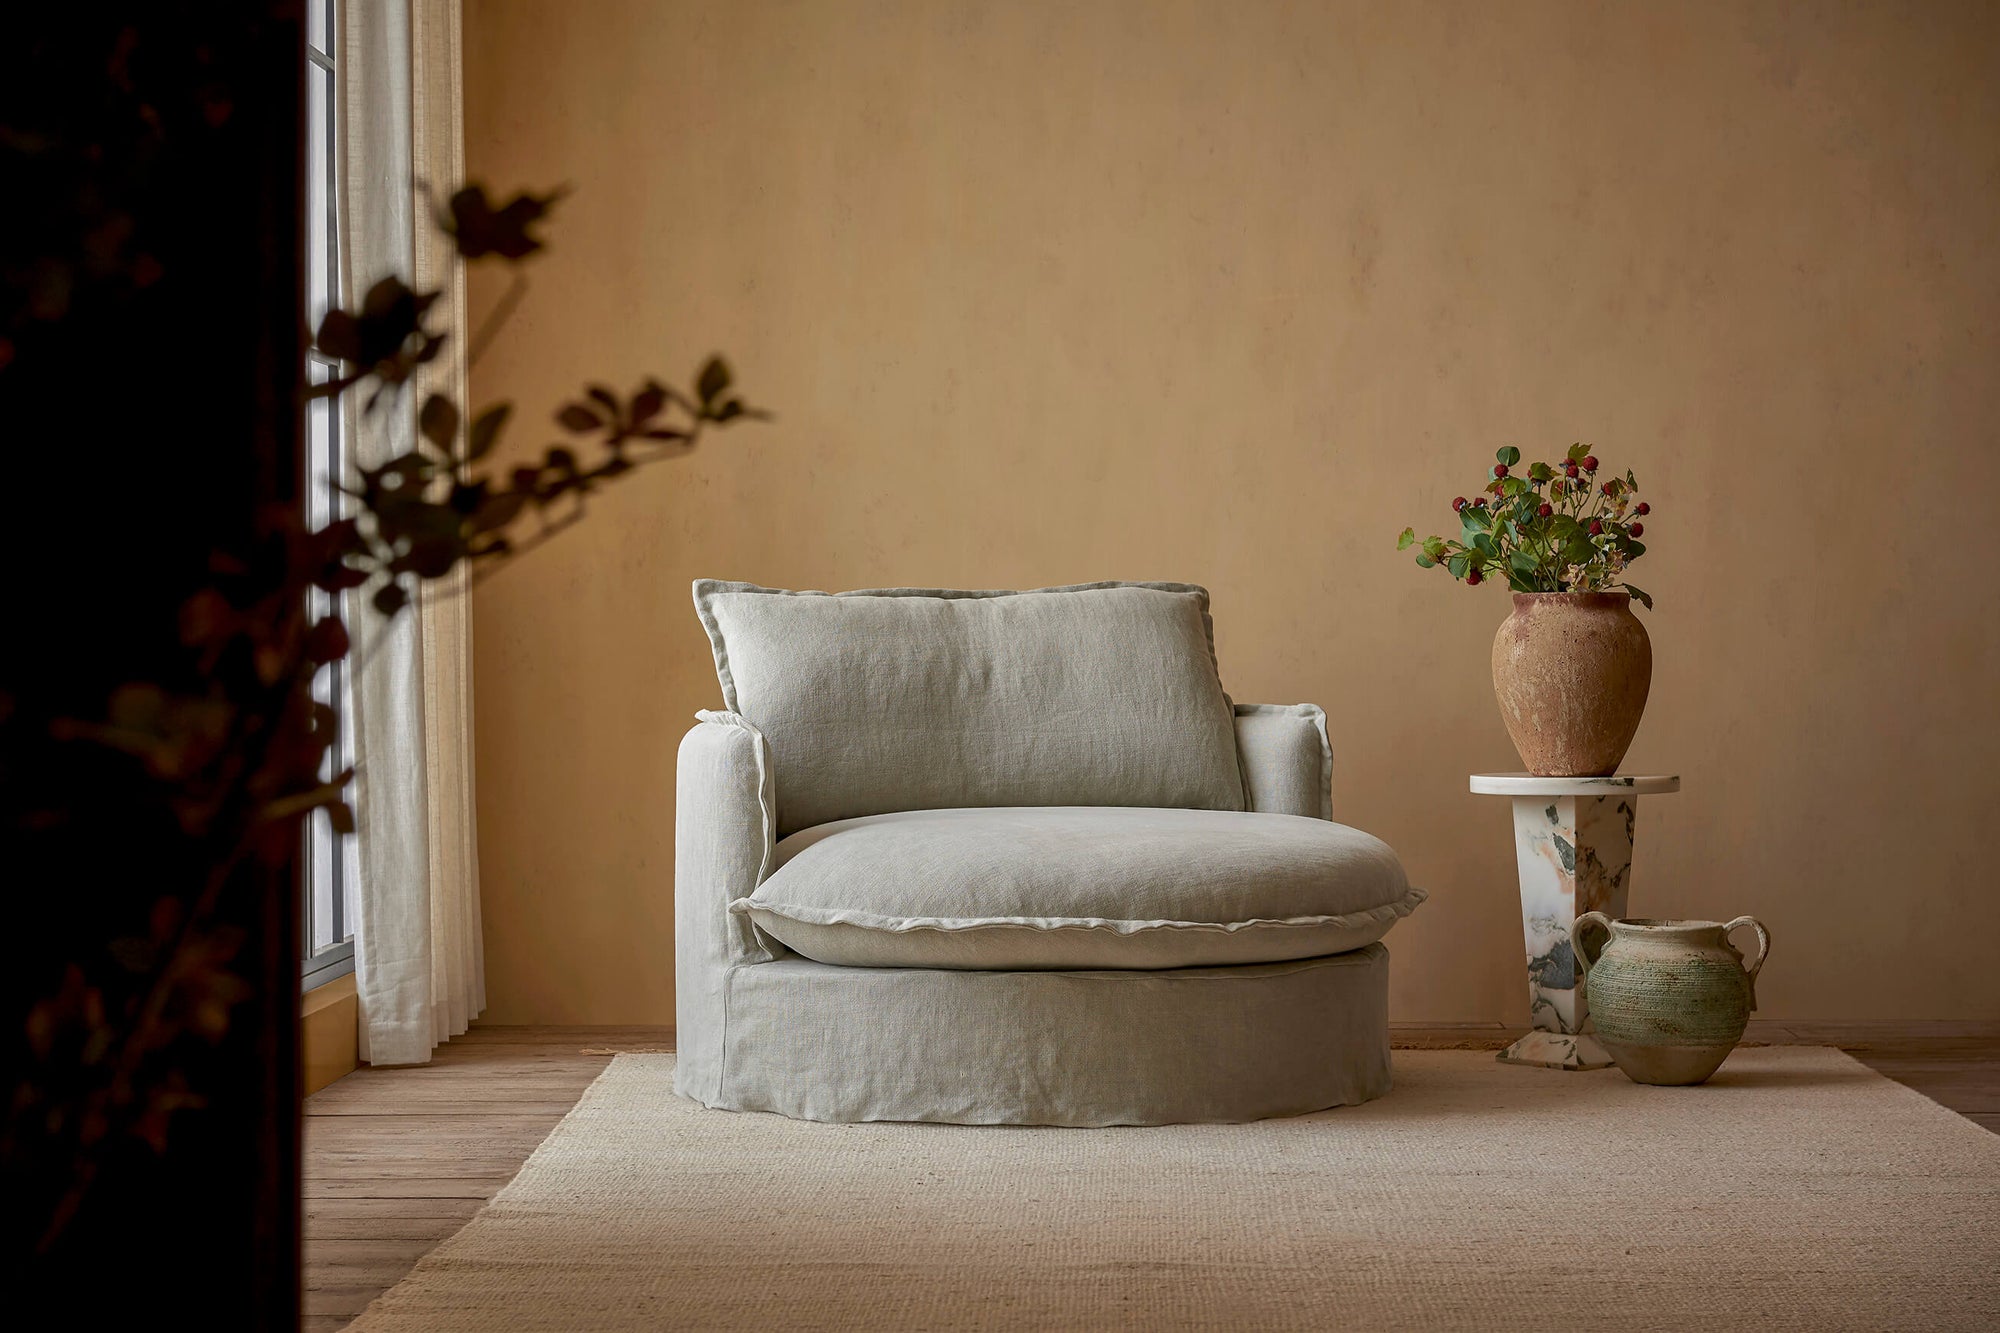 Neva Round Daybed in Jasmine Rice, a light warm greige Medium Weight Linen, placed in a sunlit room next to flowers in vases on a side table